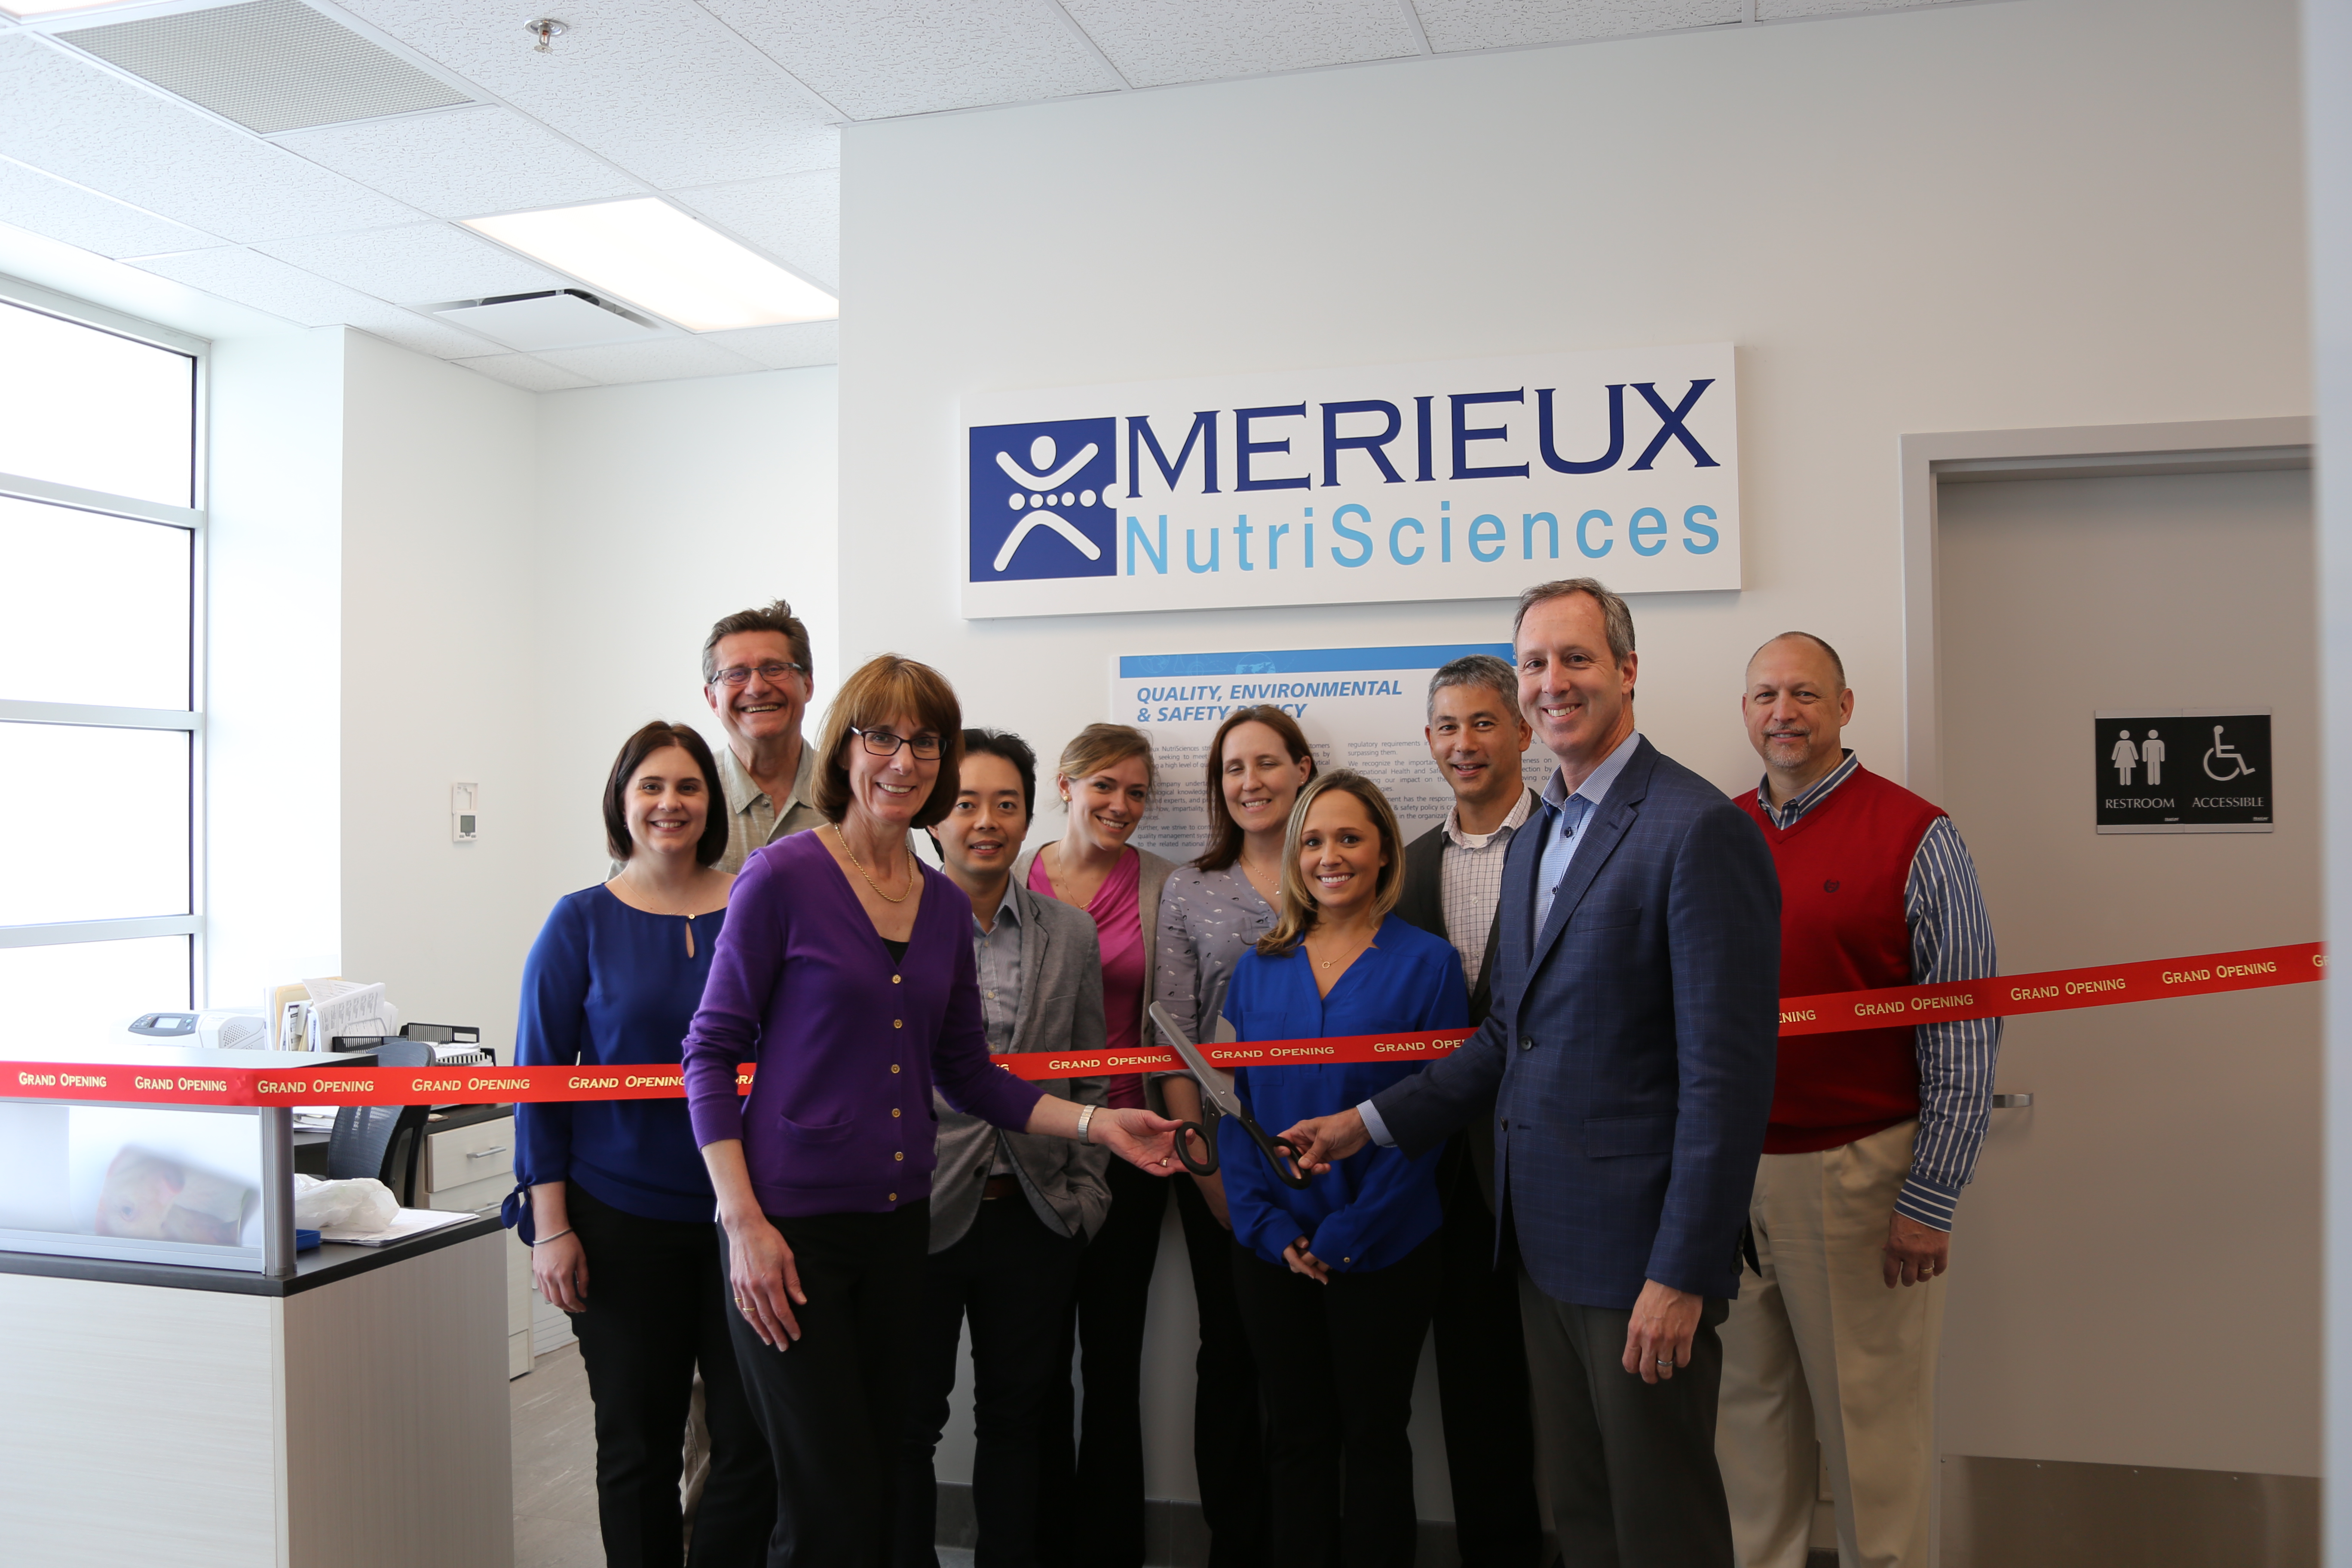 The Mérieux NutriSciences' Team Celebrate With a Ribbon Cutting